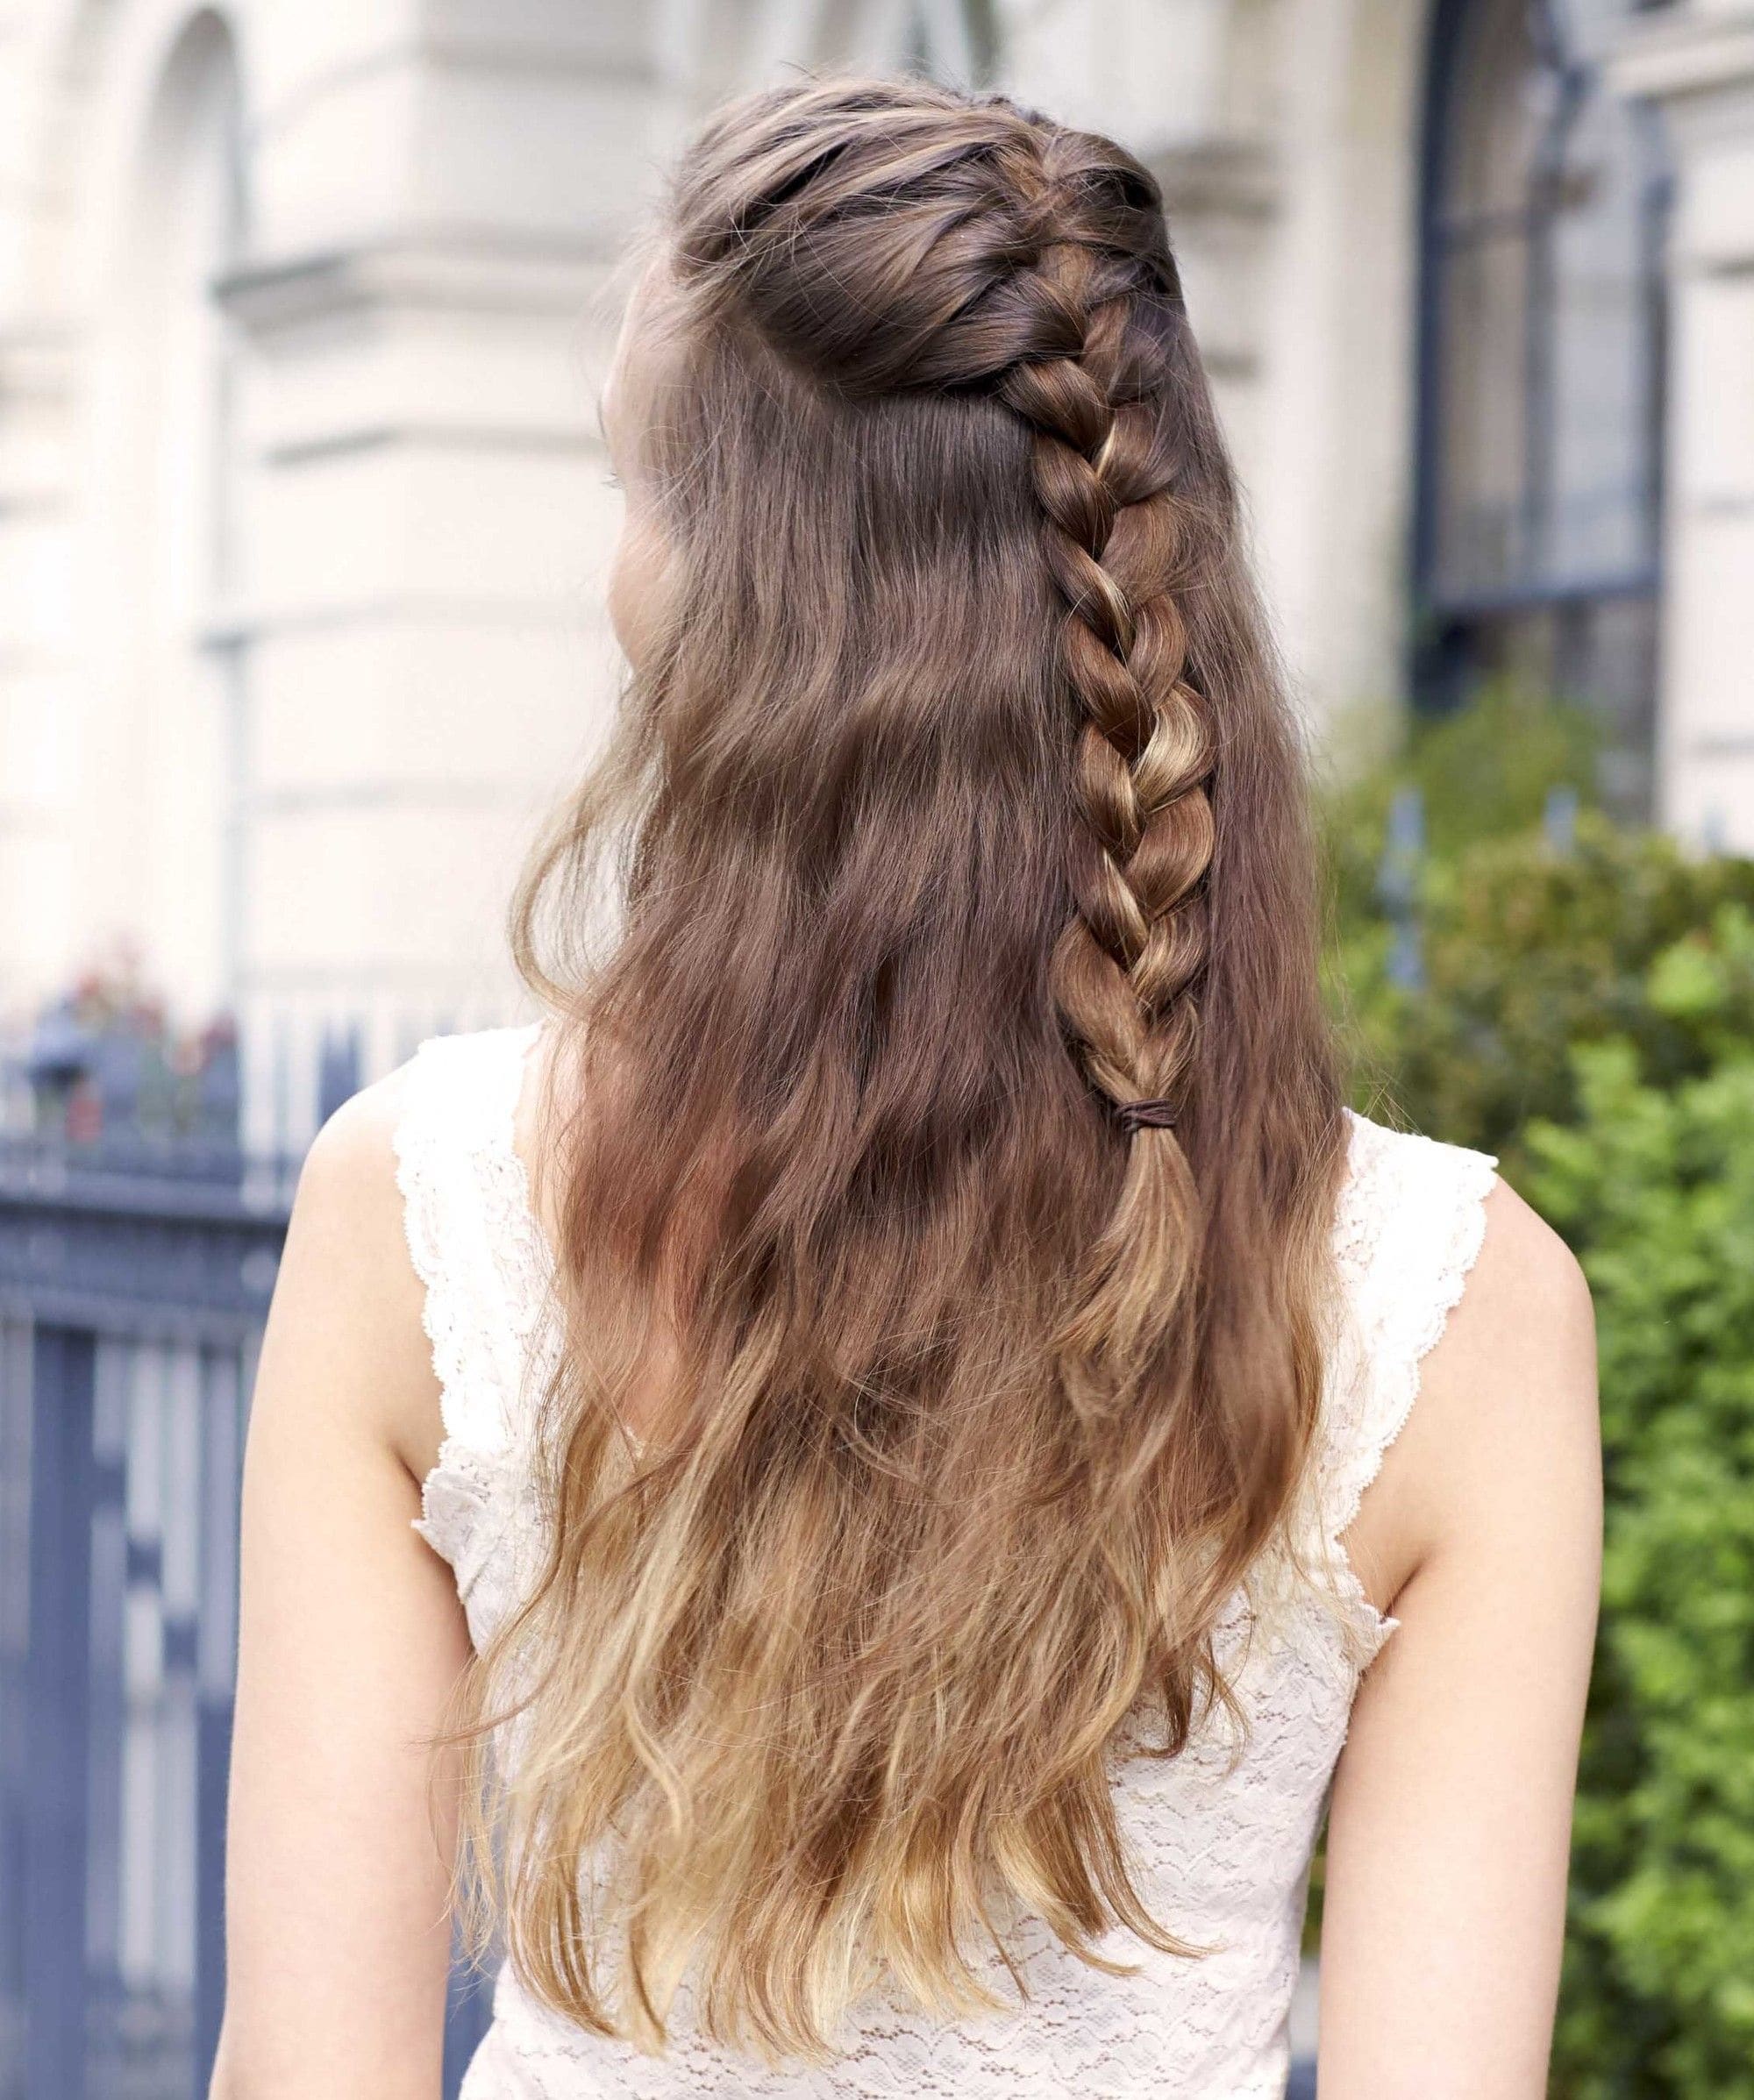 10 Easy Everyday Hairstyles For Long Hair To Try In 2023 - Hair Everyday  Review